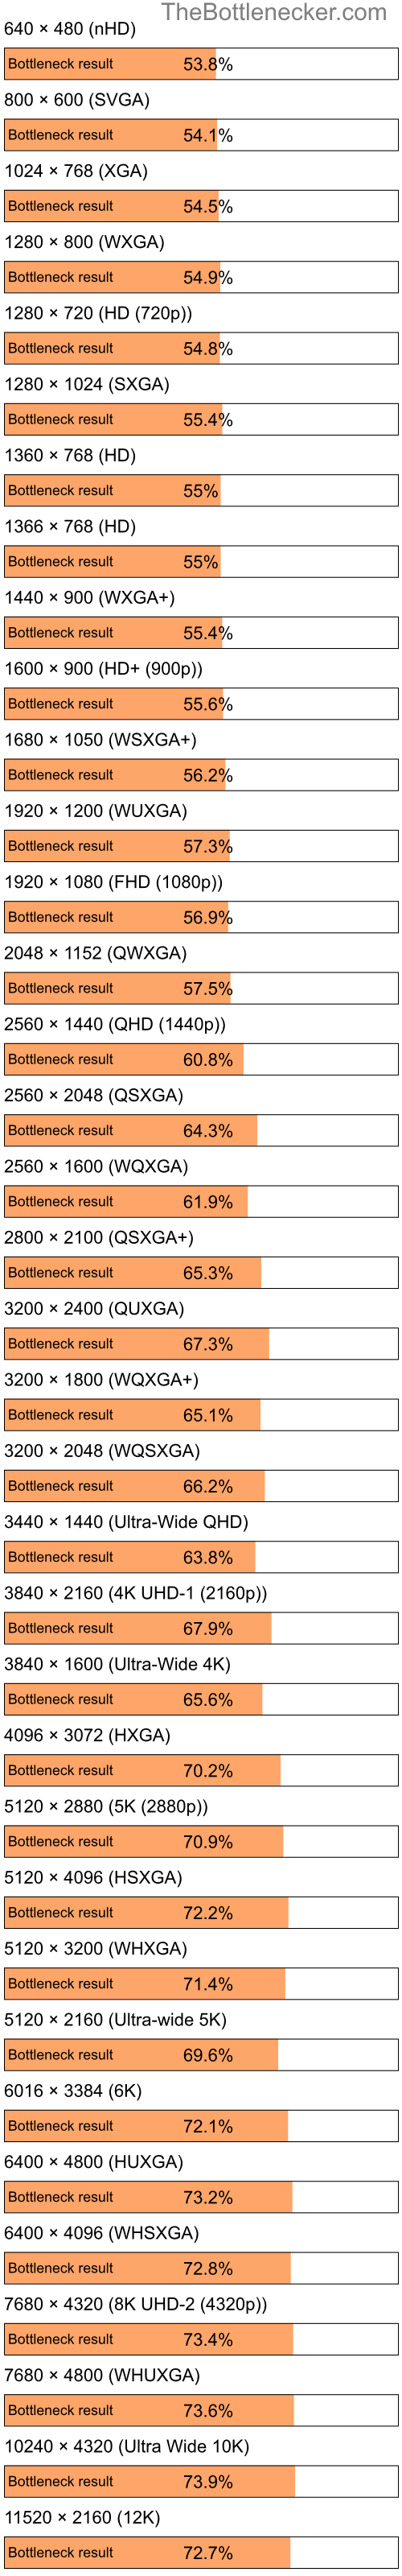 Bottleneck results by resolution for Intel Atom N270 and AMD Mobility Radeon HD 3430 in Processor Intense Tasks